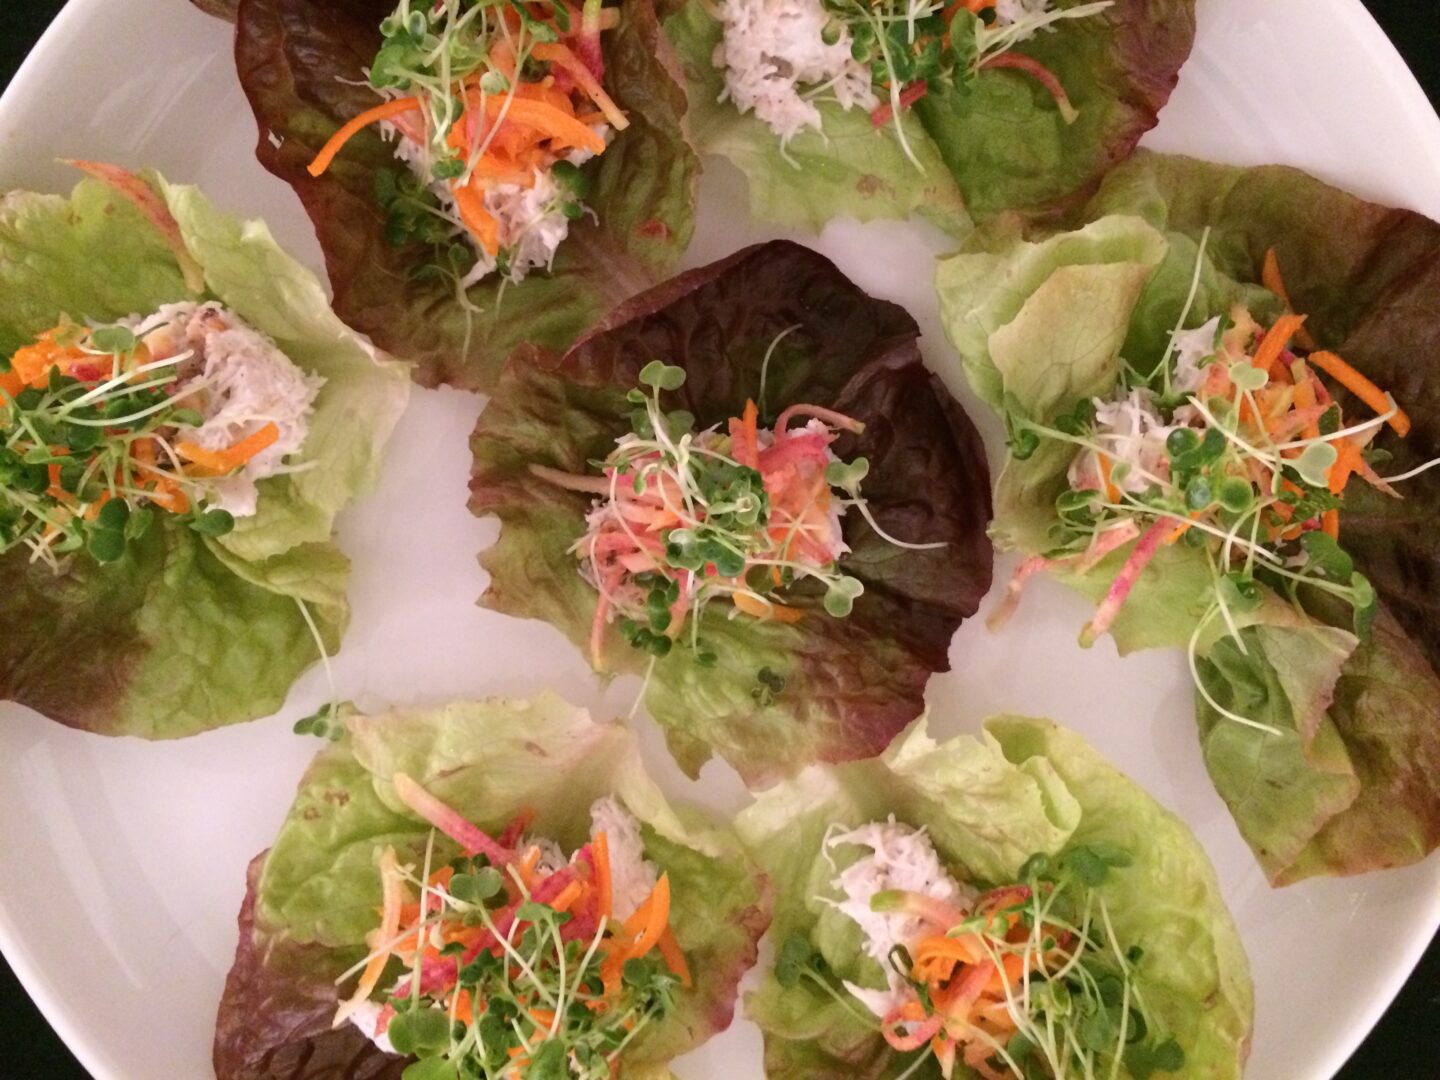 A plate of lettuce wraps topped with carrots and cranberries.